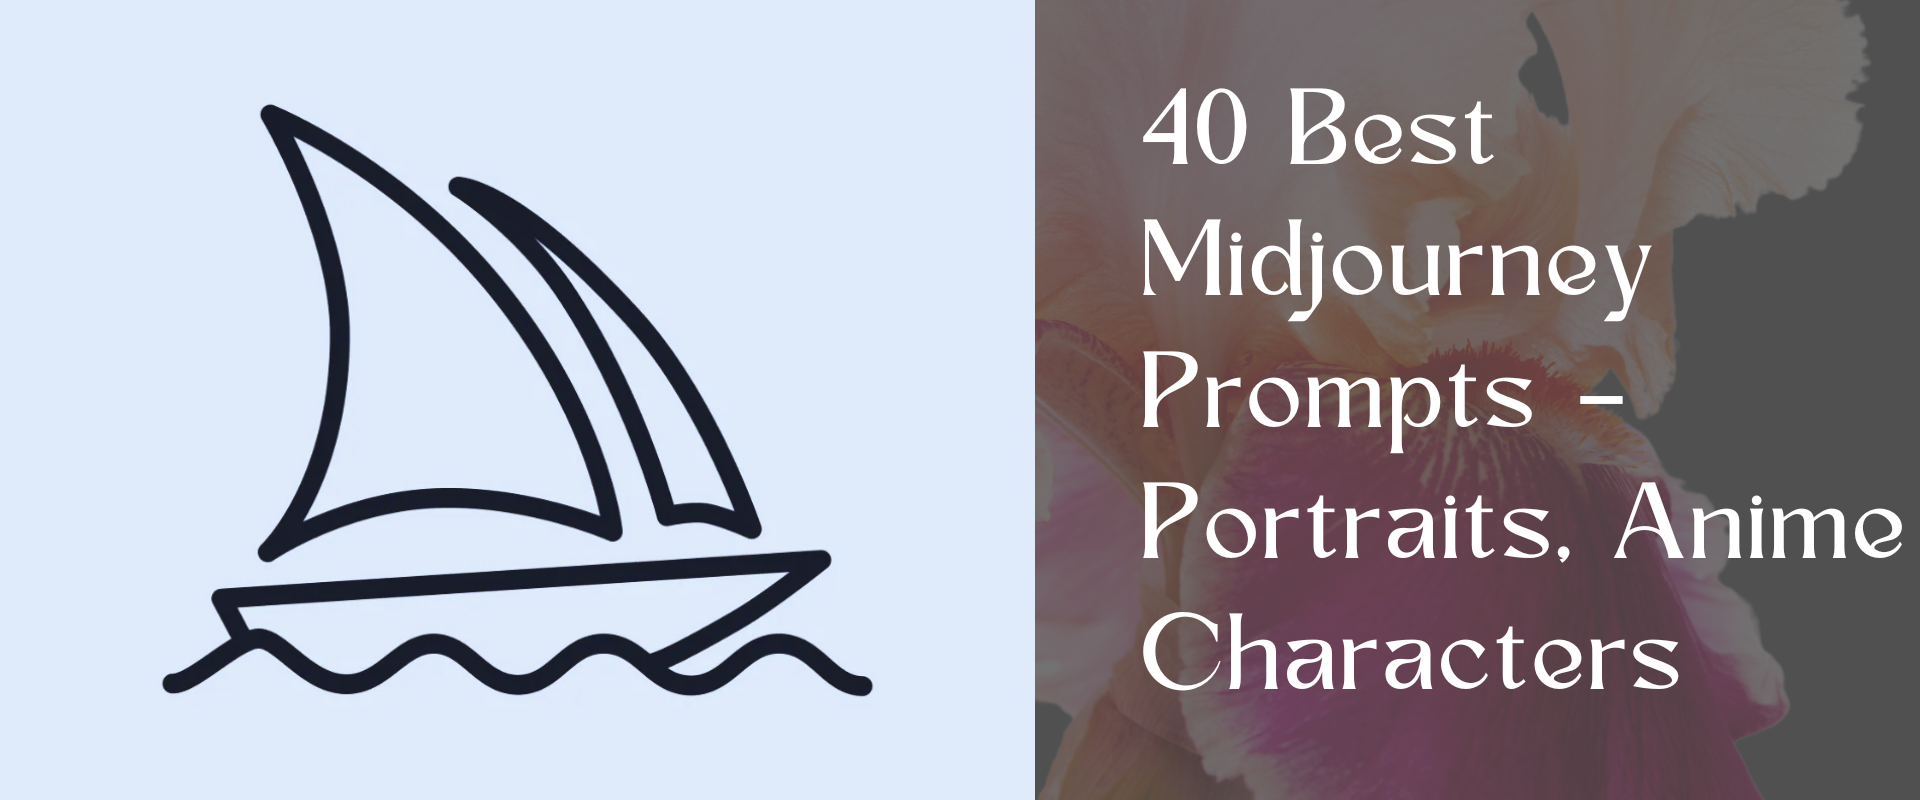 40 Best Midjourney Prompts – Portraits, Anime Characters